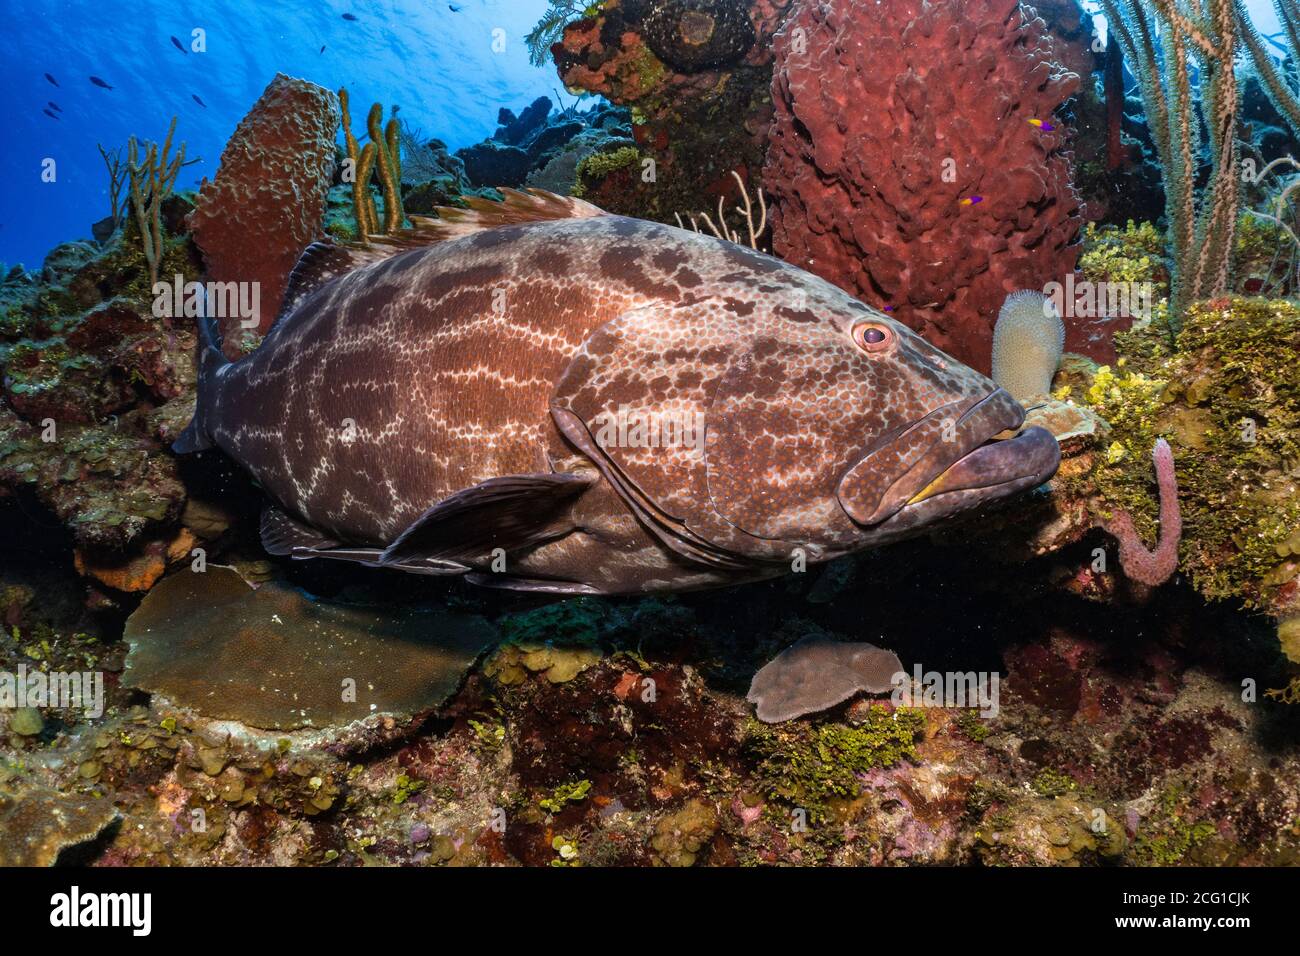 Large grouper on coral reef scuba diving Stock Photo